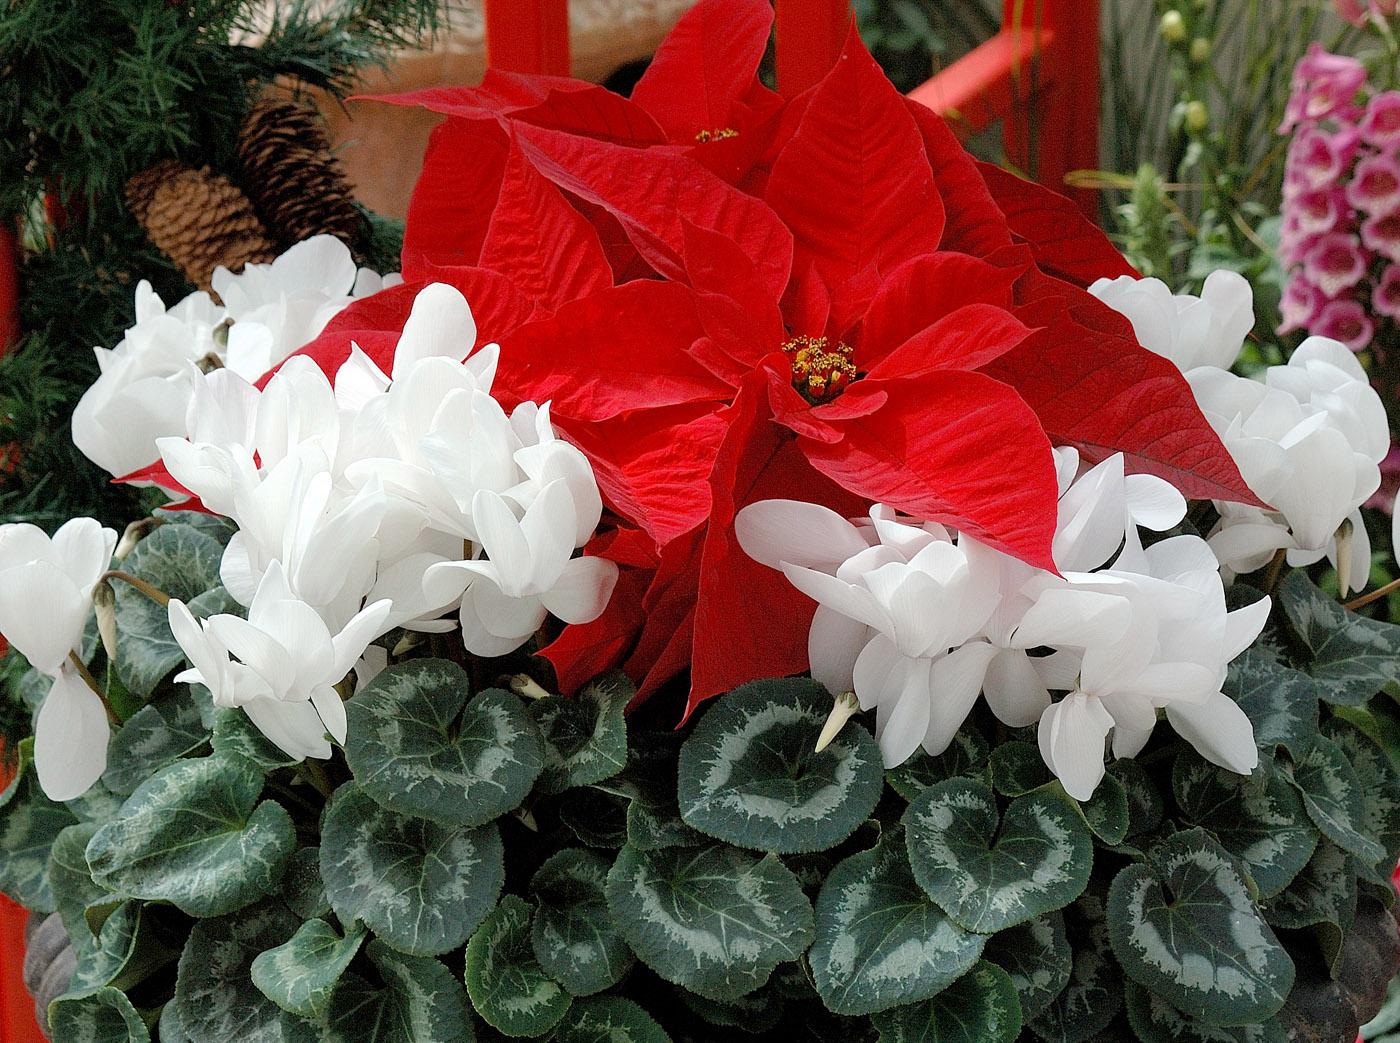 One of the showiest partnerships comes from combining the poinsettia with cyclamen, which come in several shades of red, pink, white, purple and extraordinarily beautiful variegated foliage.